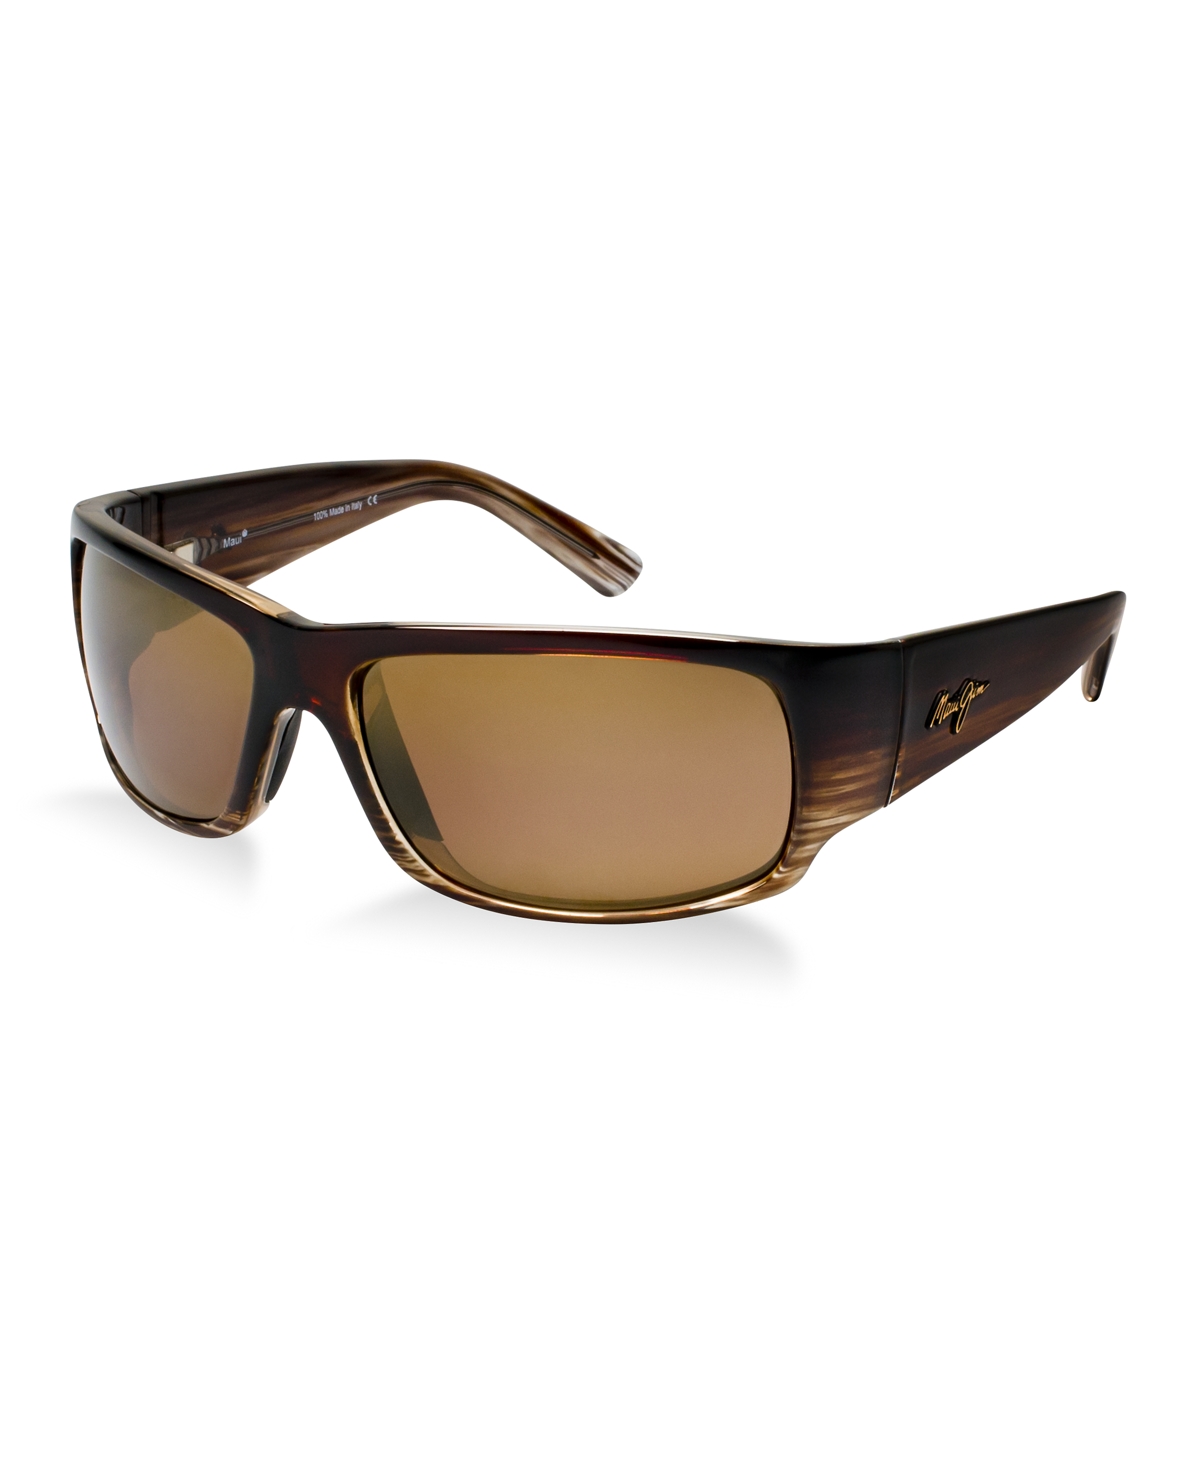 Maui Jim Polarized World Cup Sunglasses, H266-01 In Brown